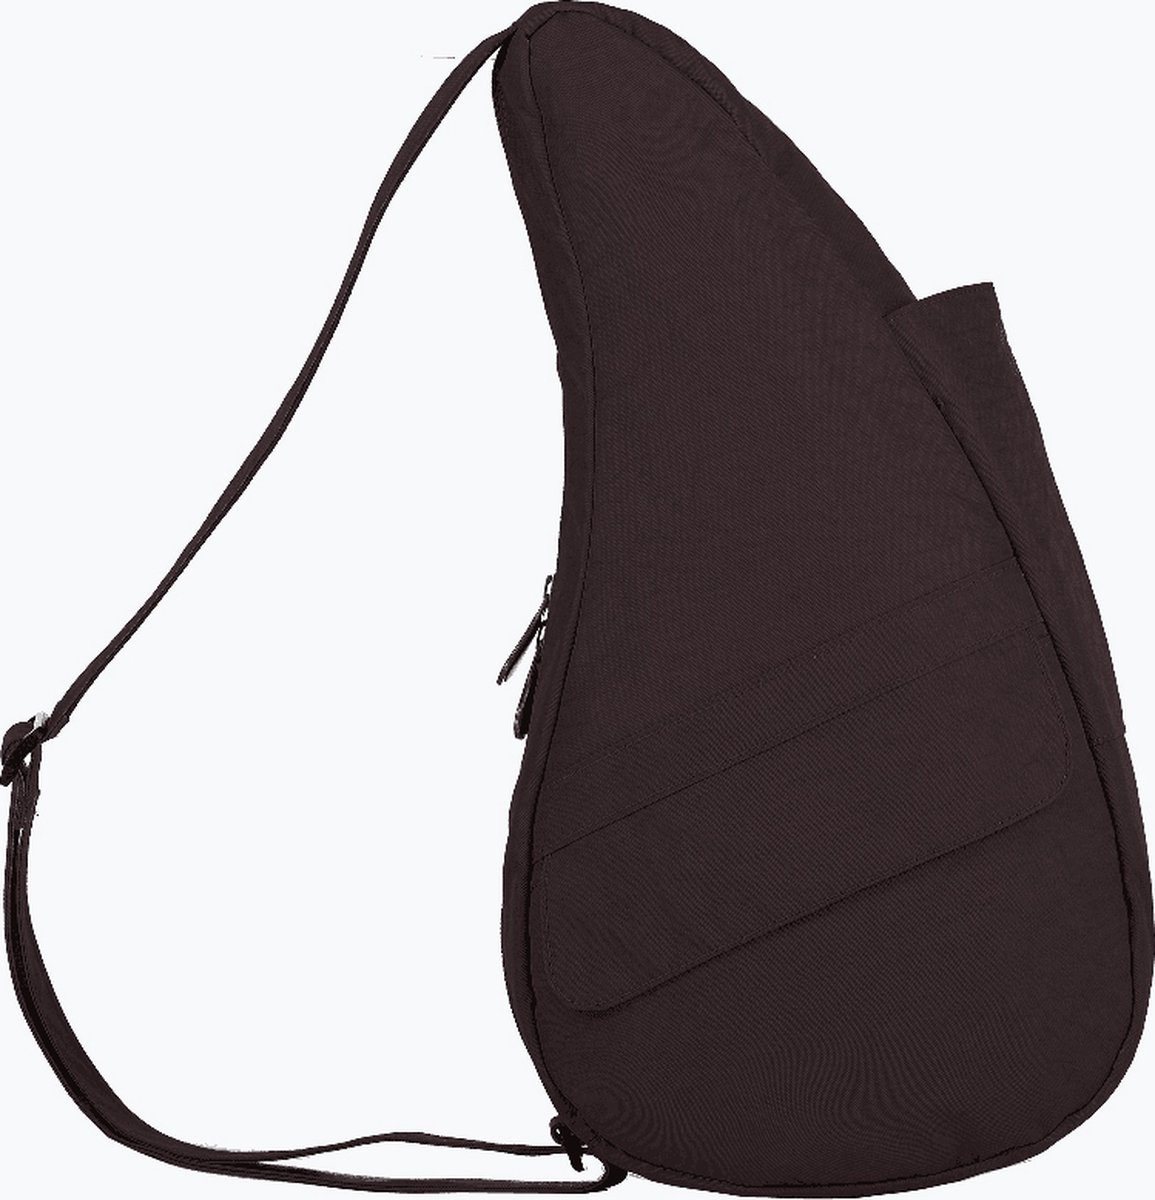 The Healthy Back Bag S The Classic Collection Textured Nylon Raisin